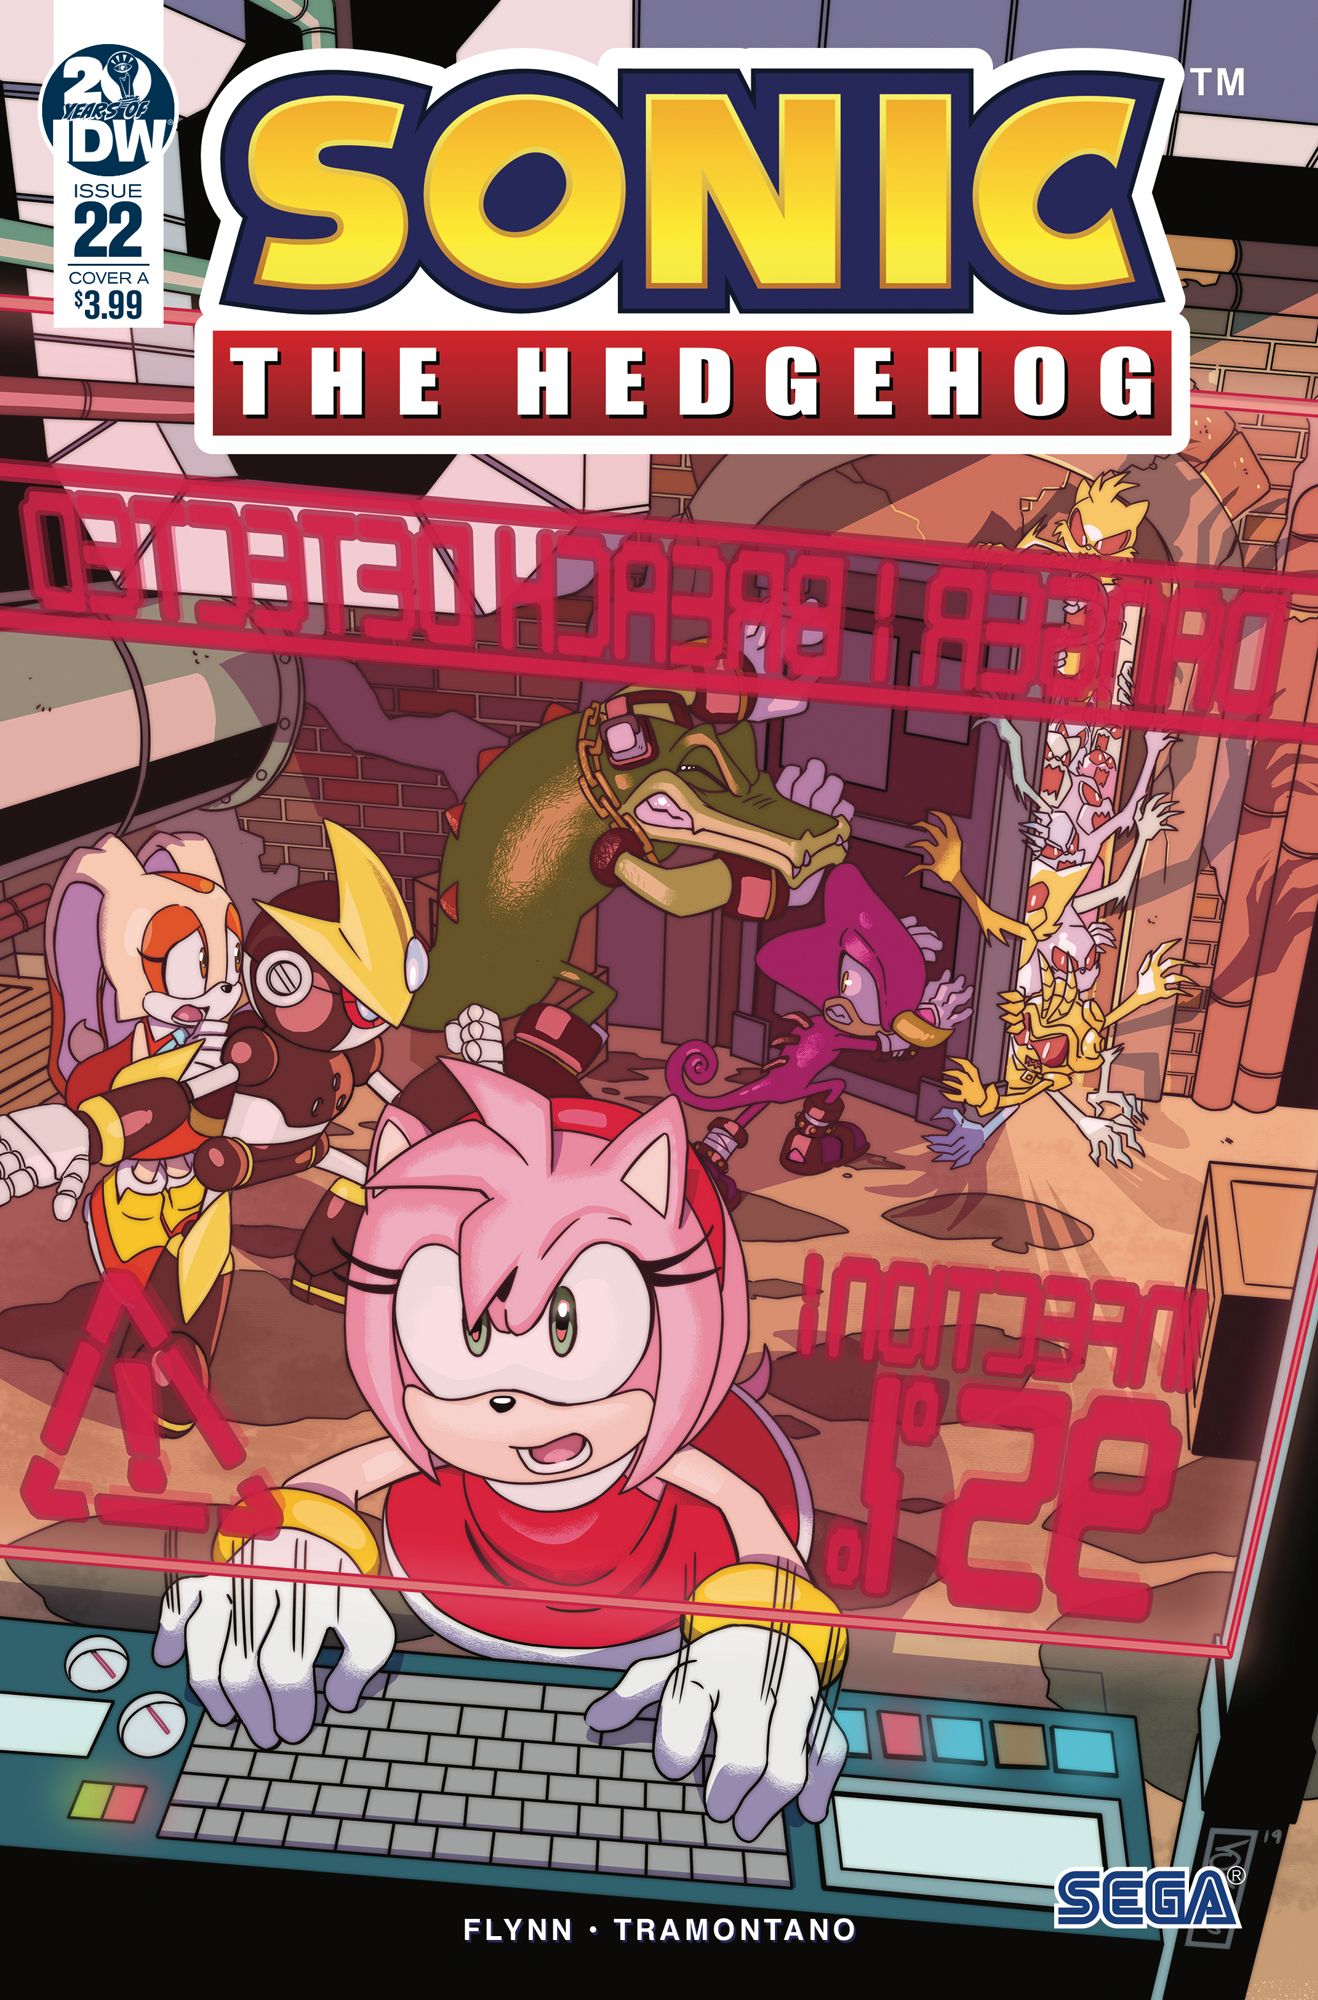 IDW Sonic the Hedgehog Issue 22. Sonic News Network